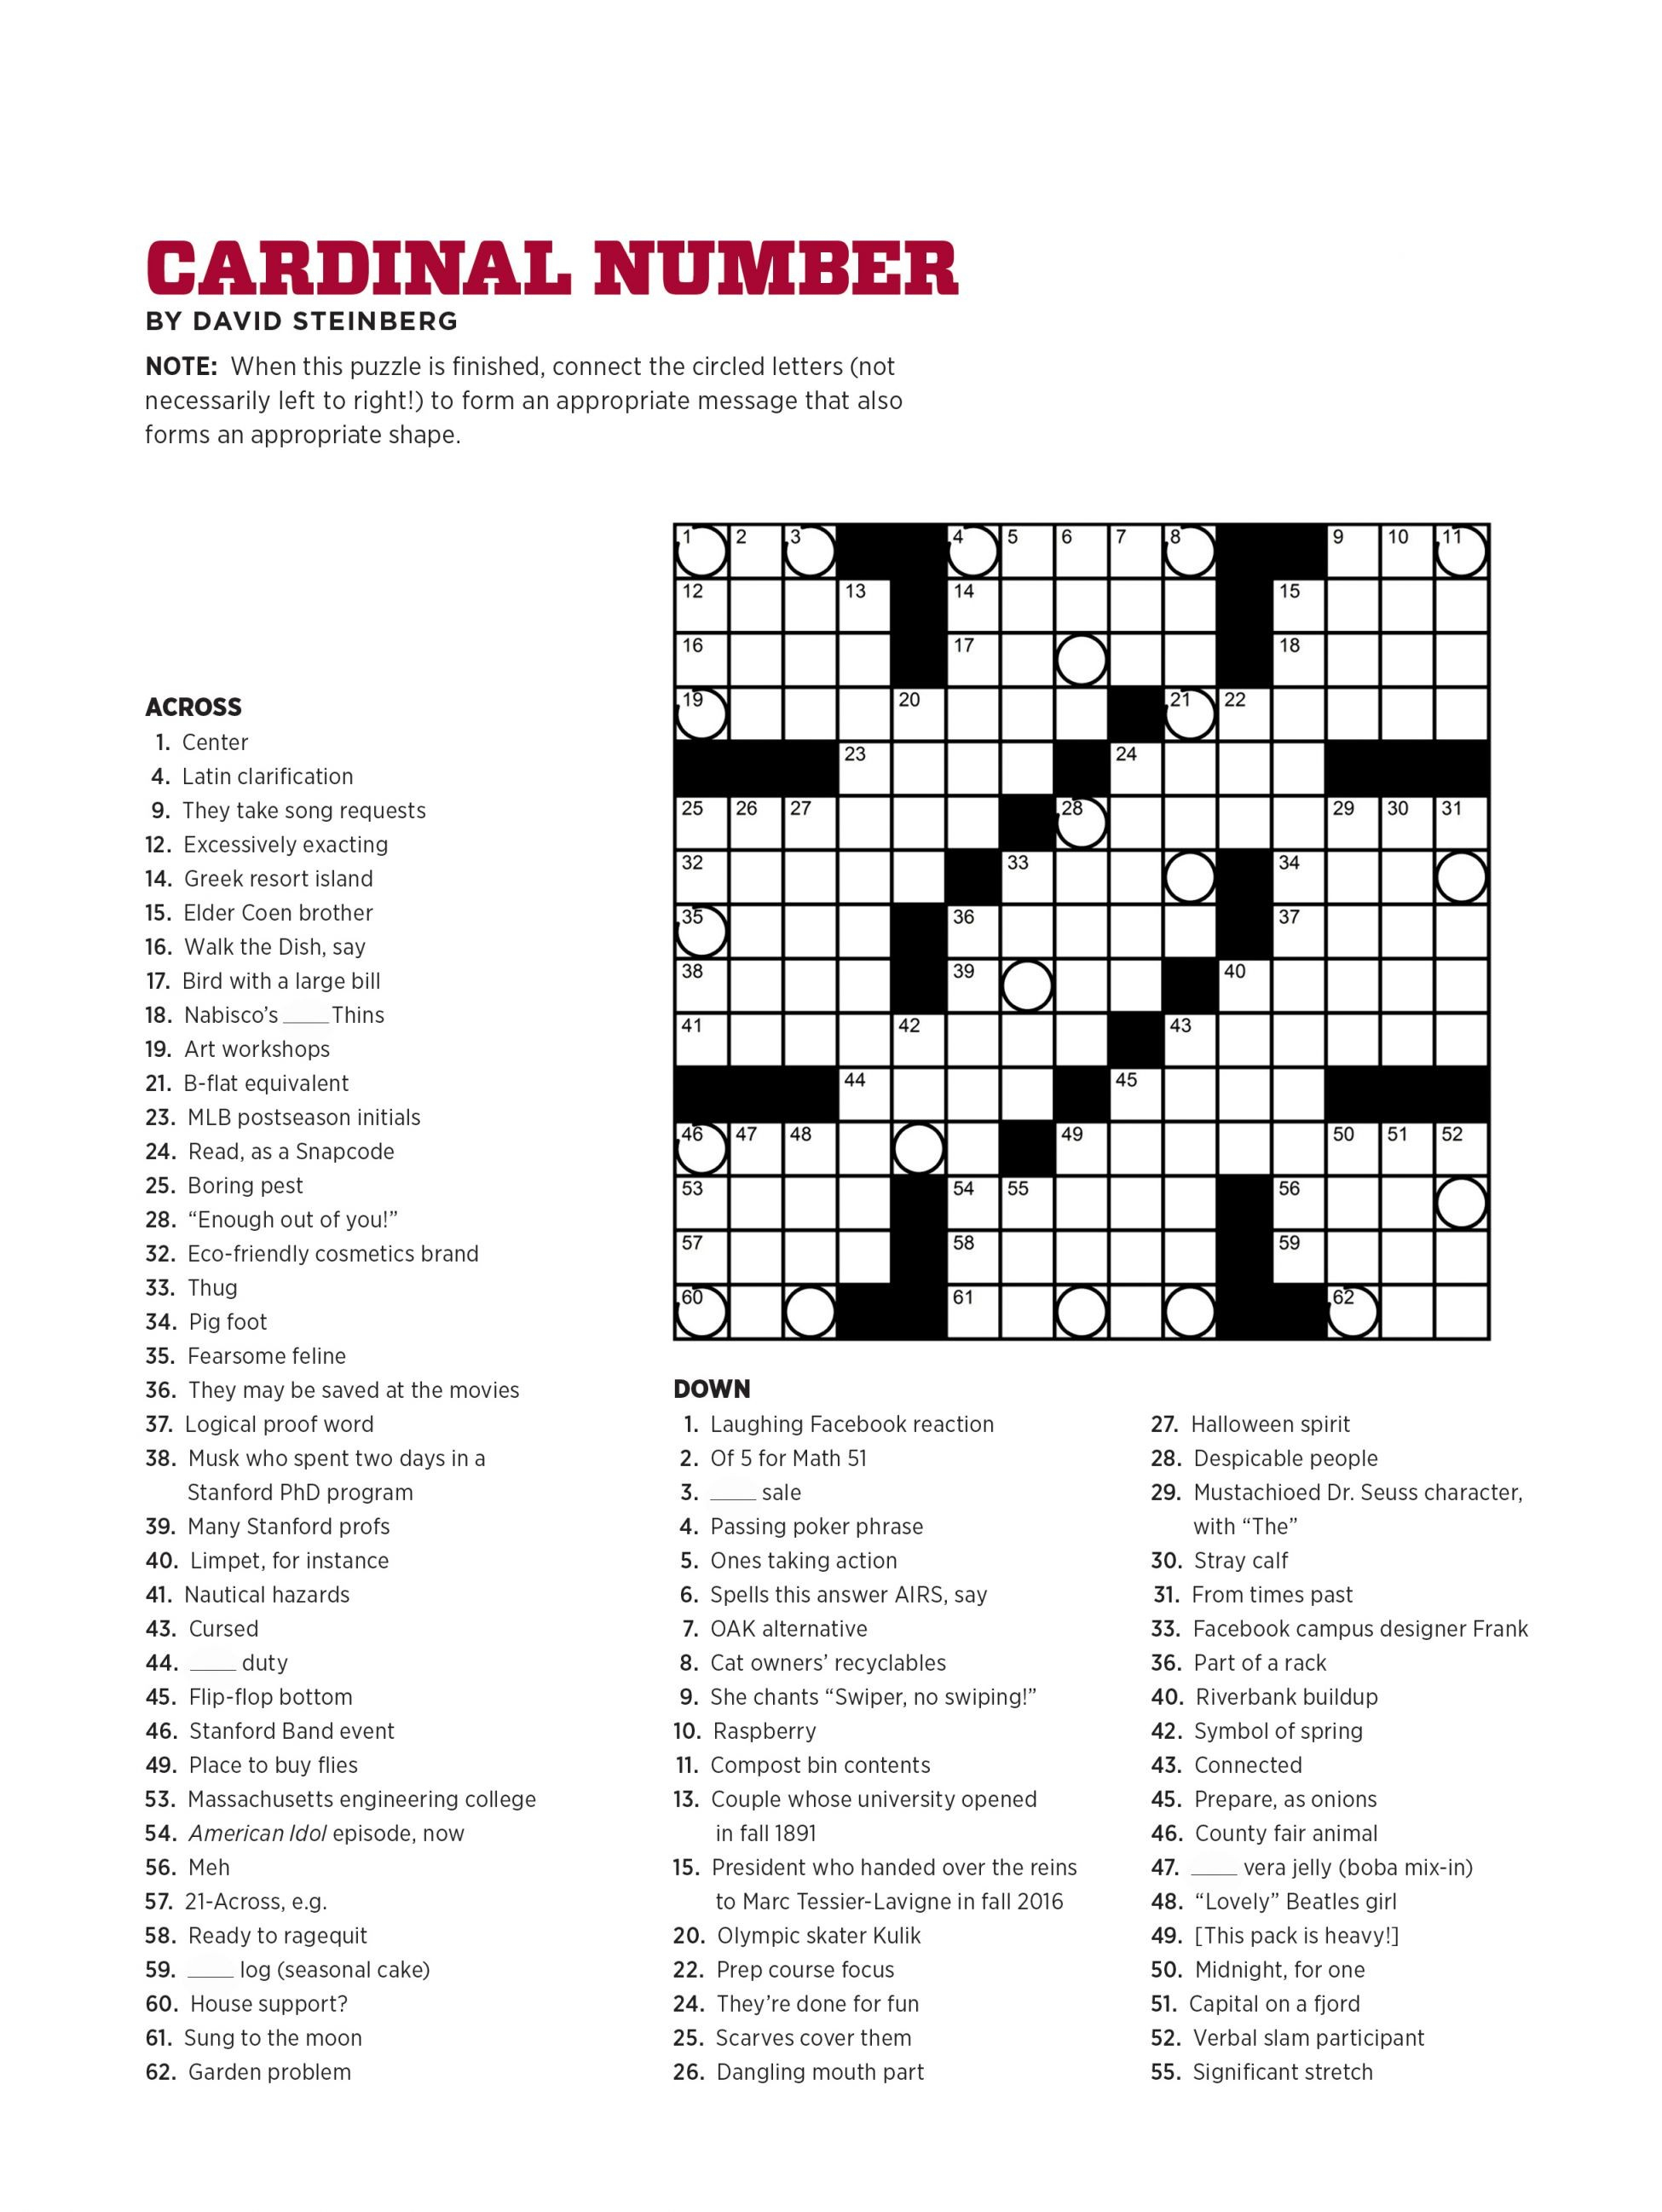 usa today crosswords from win98 computer